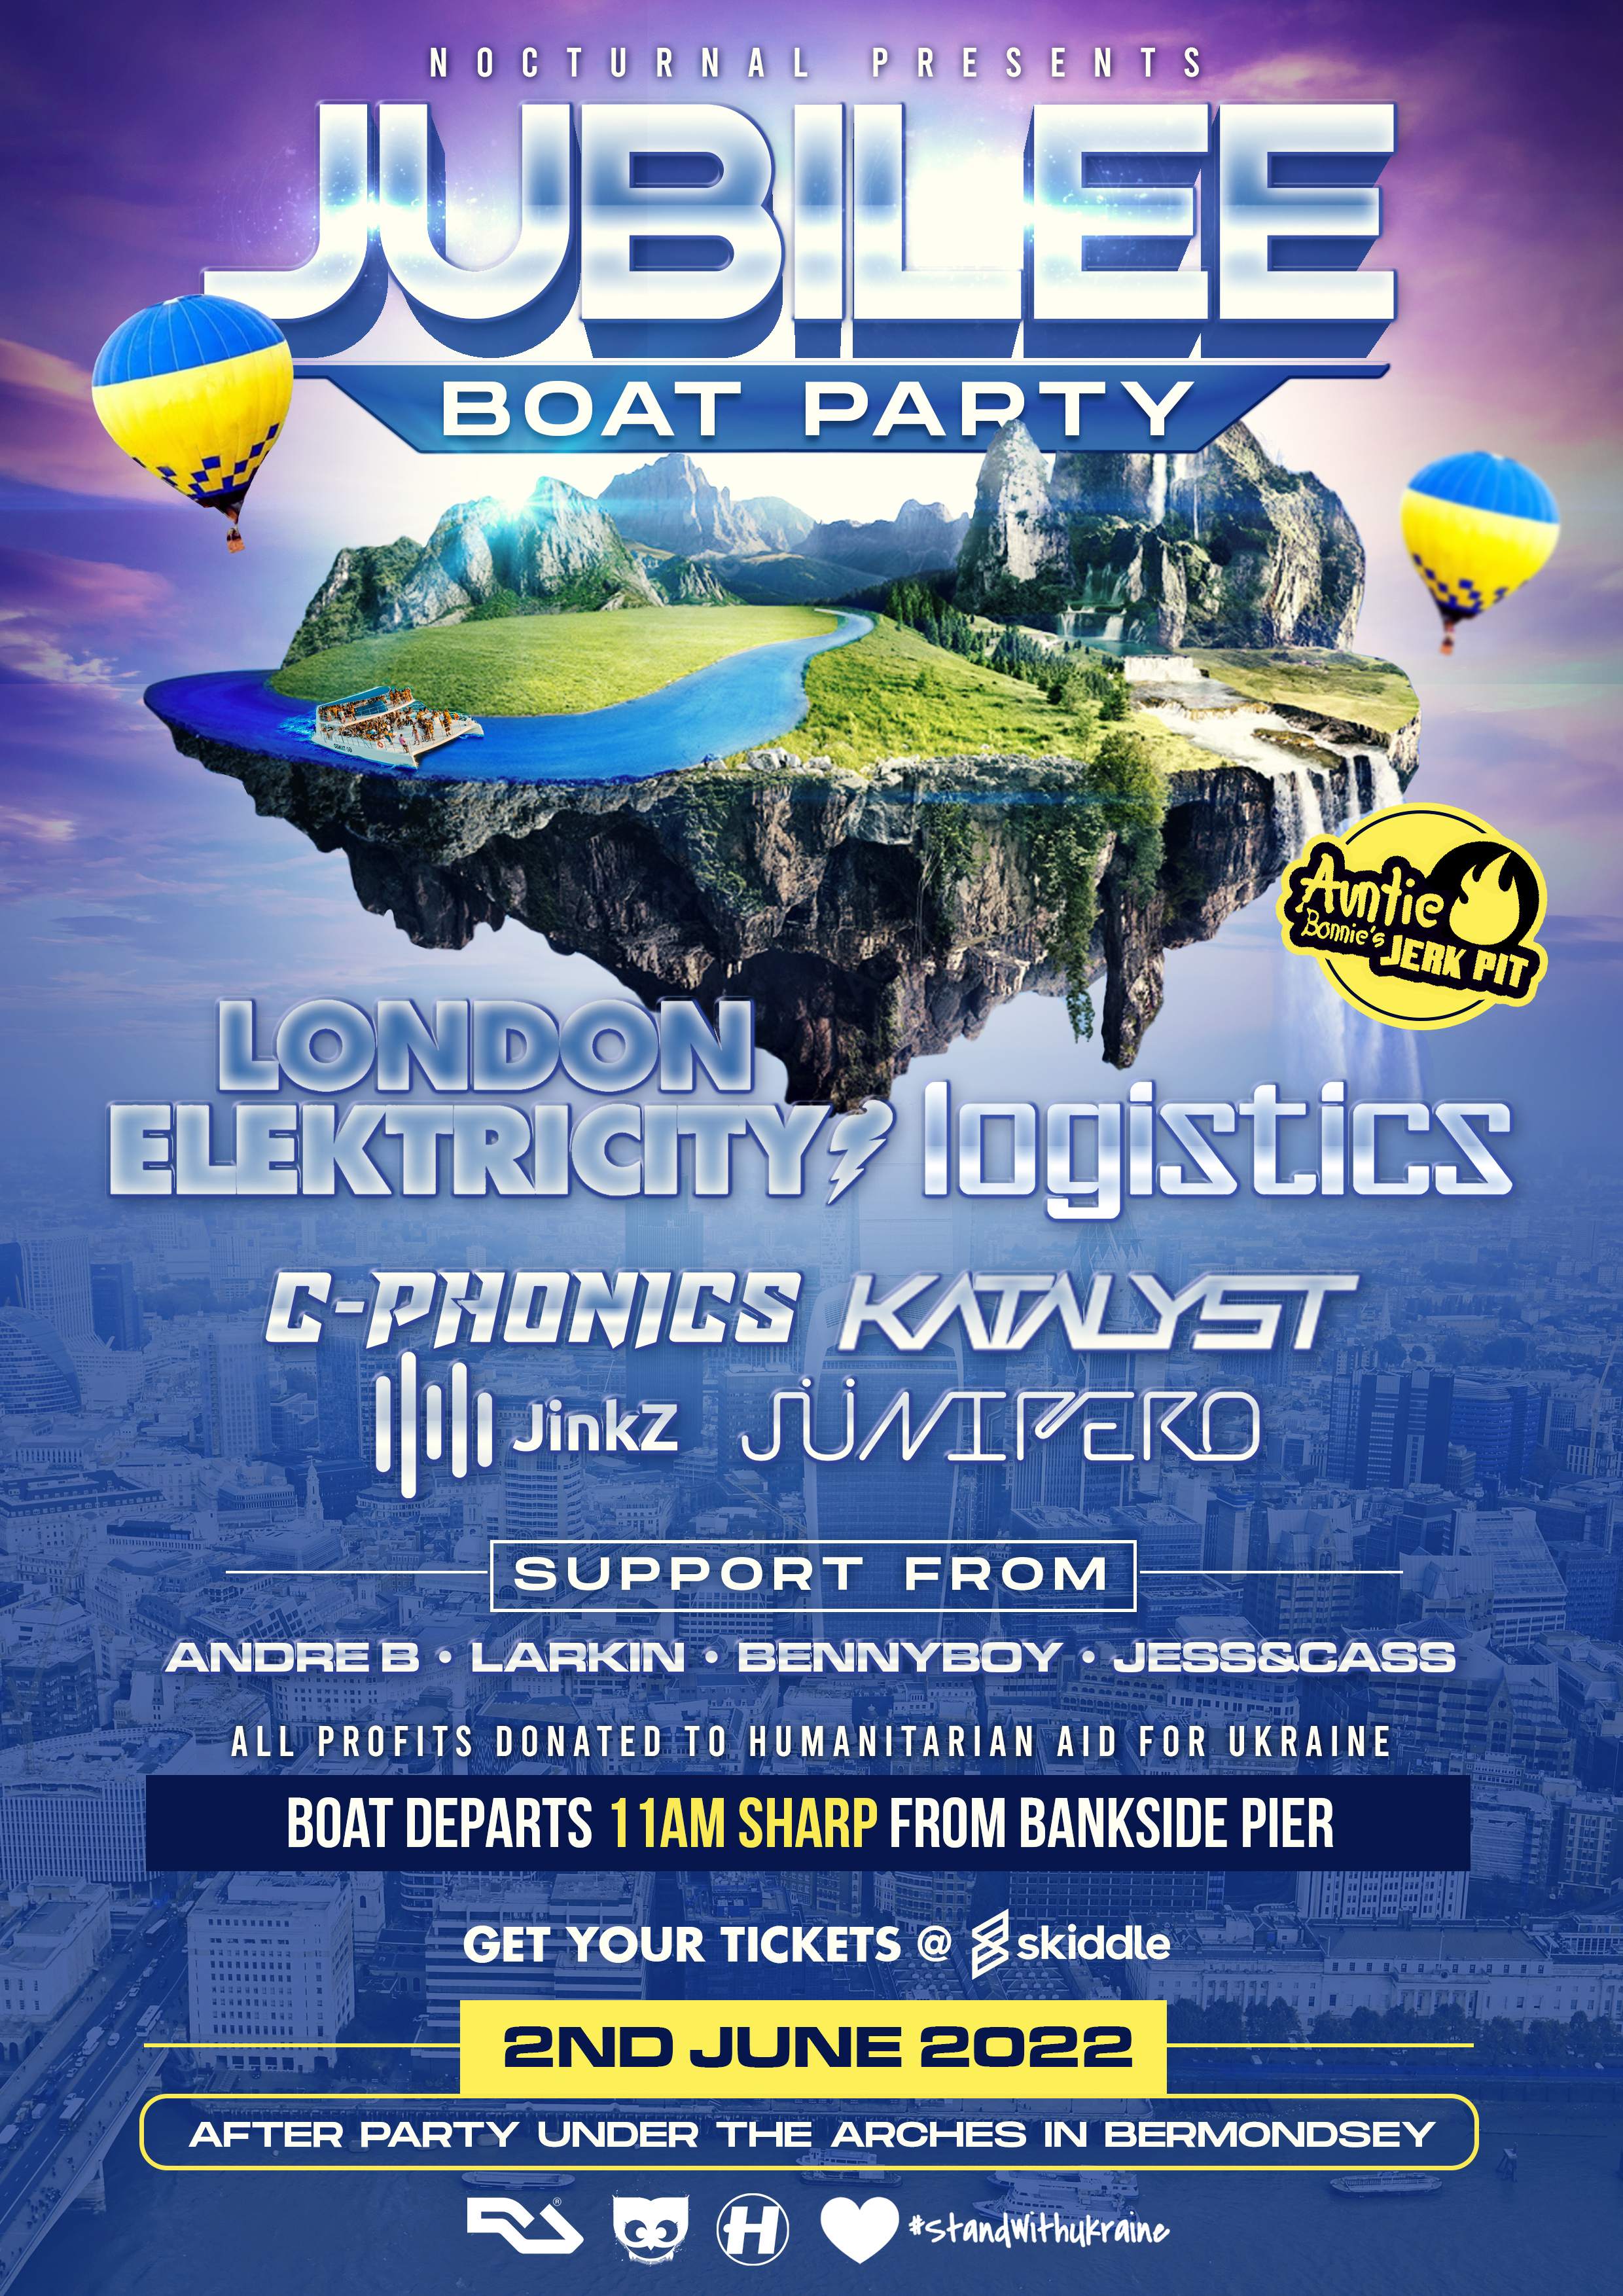 Bank Holiday Boat Party with London Elektricity & Logistics - フライヤー表